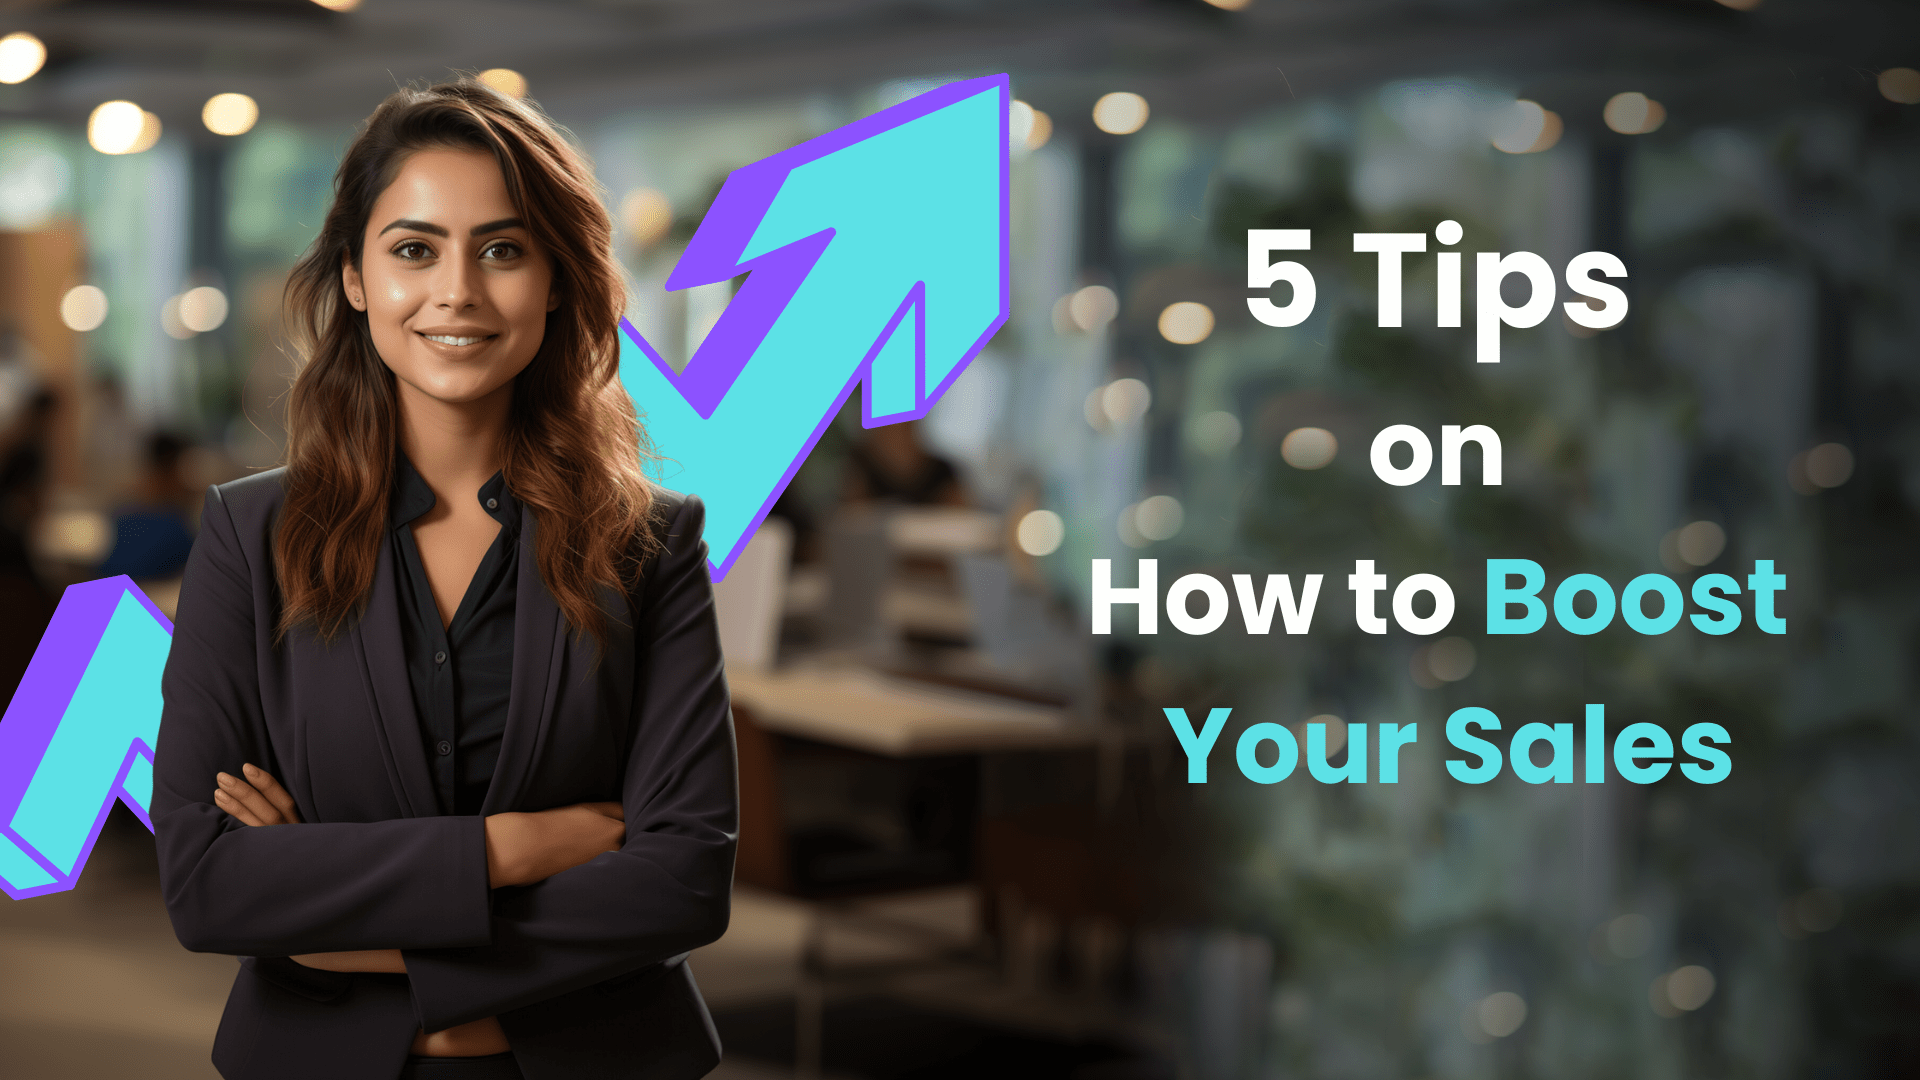 5 Tips on How to Boost Your Sales